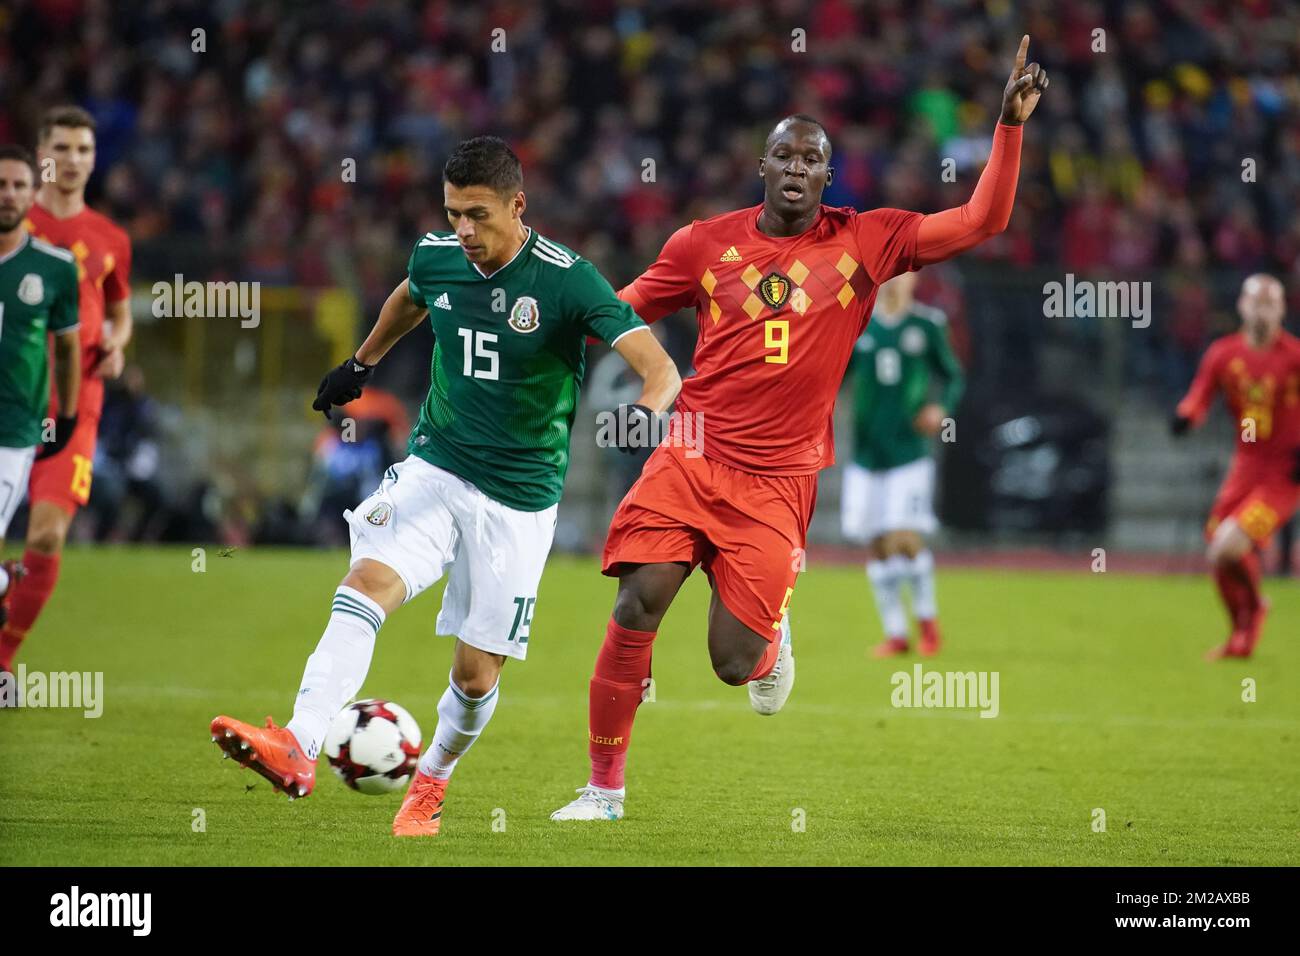 Mexico's Hector Moreno and Belgium's Romelu Lukaku fight for the ball during a friendly soccer game between Belgian national team Red Devils and Mexico, Friday 10 November 2017, in Brugge. BELGA PHOTO BRUNO FAHY Stock Photo